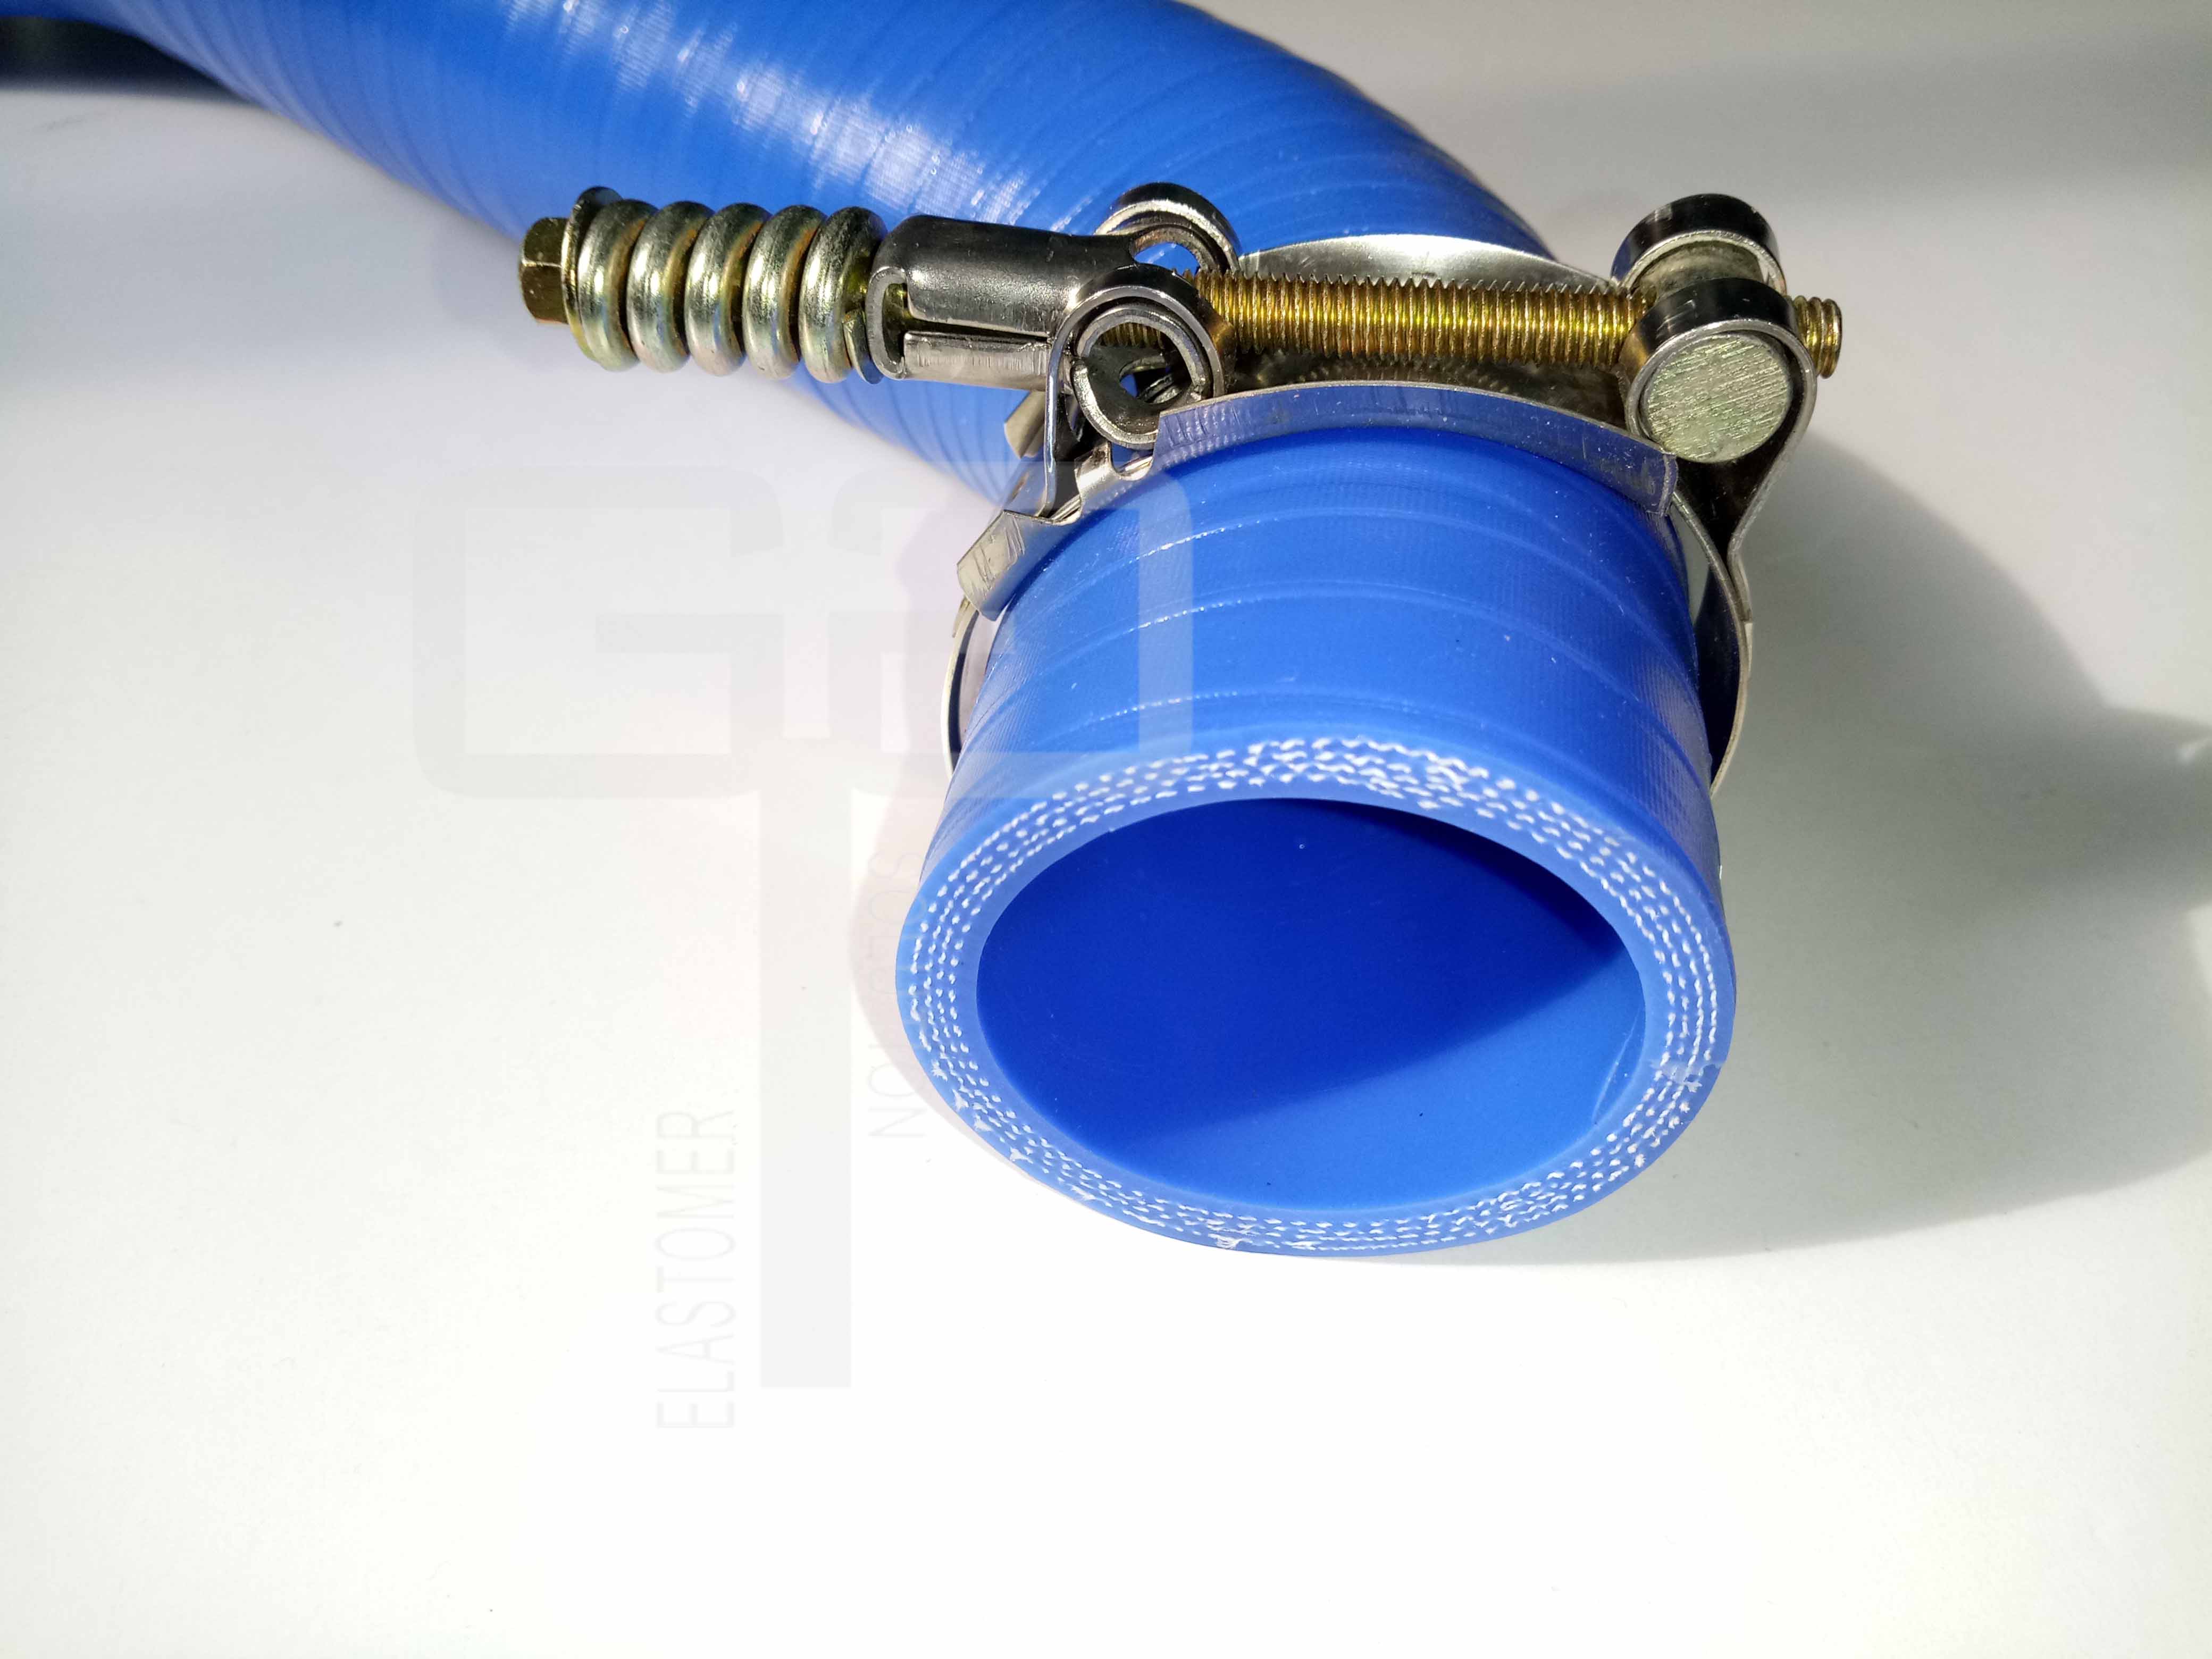 Silicone Rubber Pipes